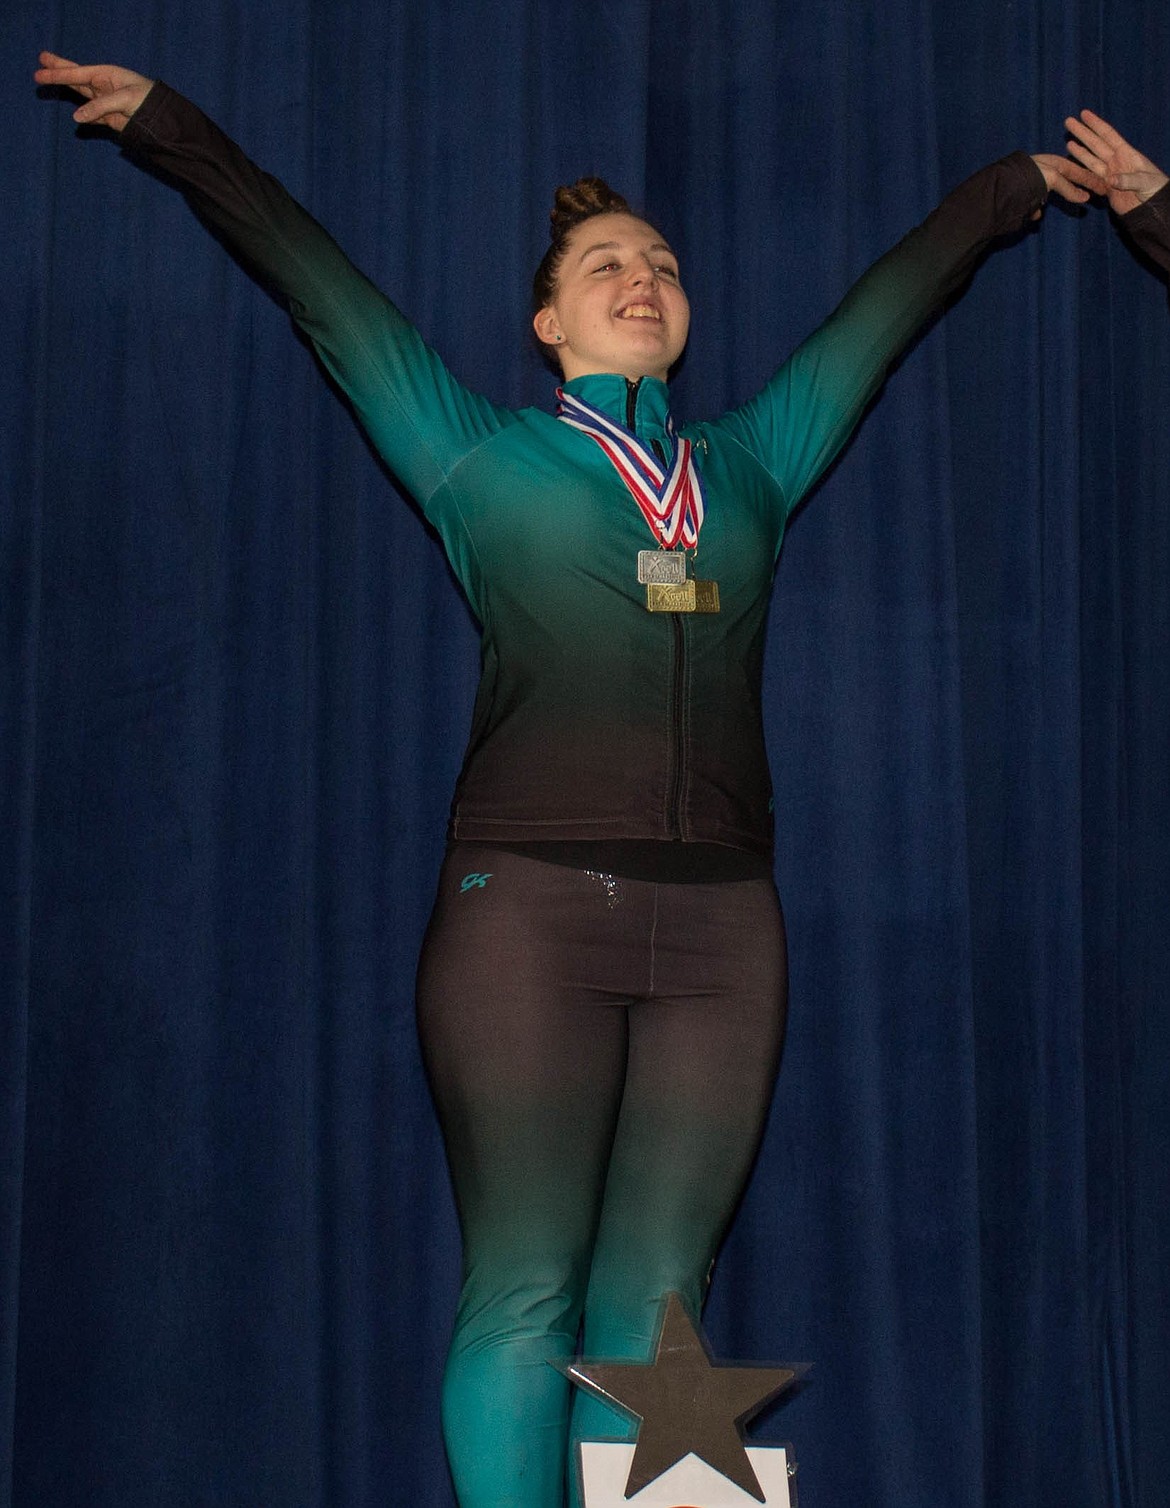 Courtesy photo
Mallory Okon of Technique Gymnastics won the Xcel Platinum state title in the Vault, Bar, Floor and All Around at the recent Xcel state championships in Meridian.